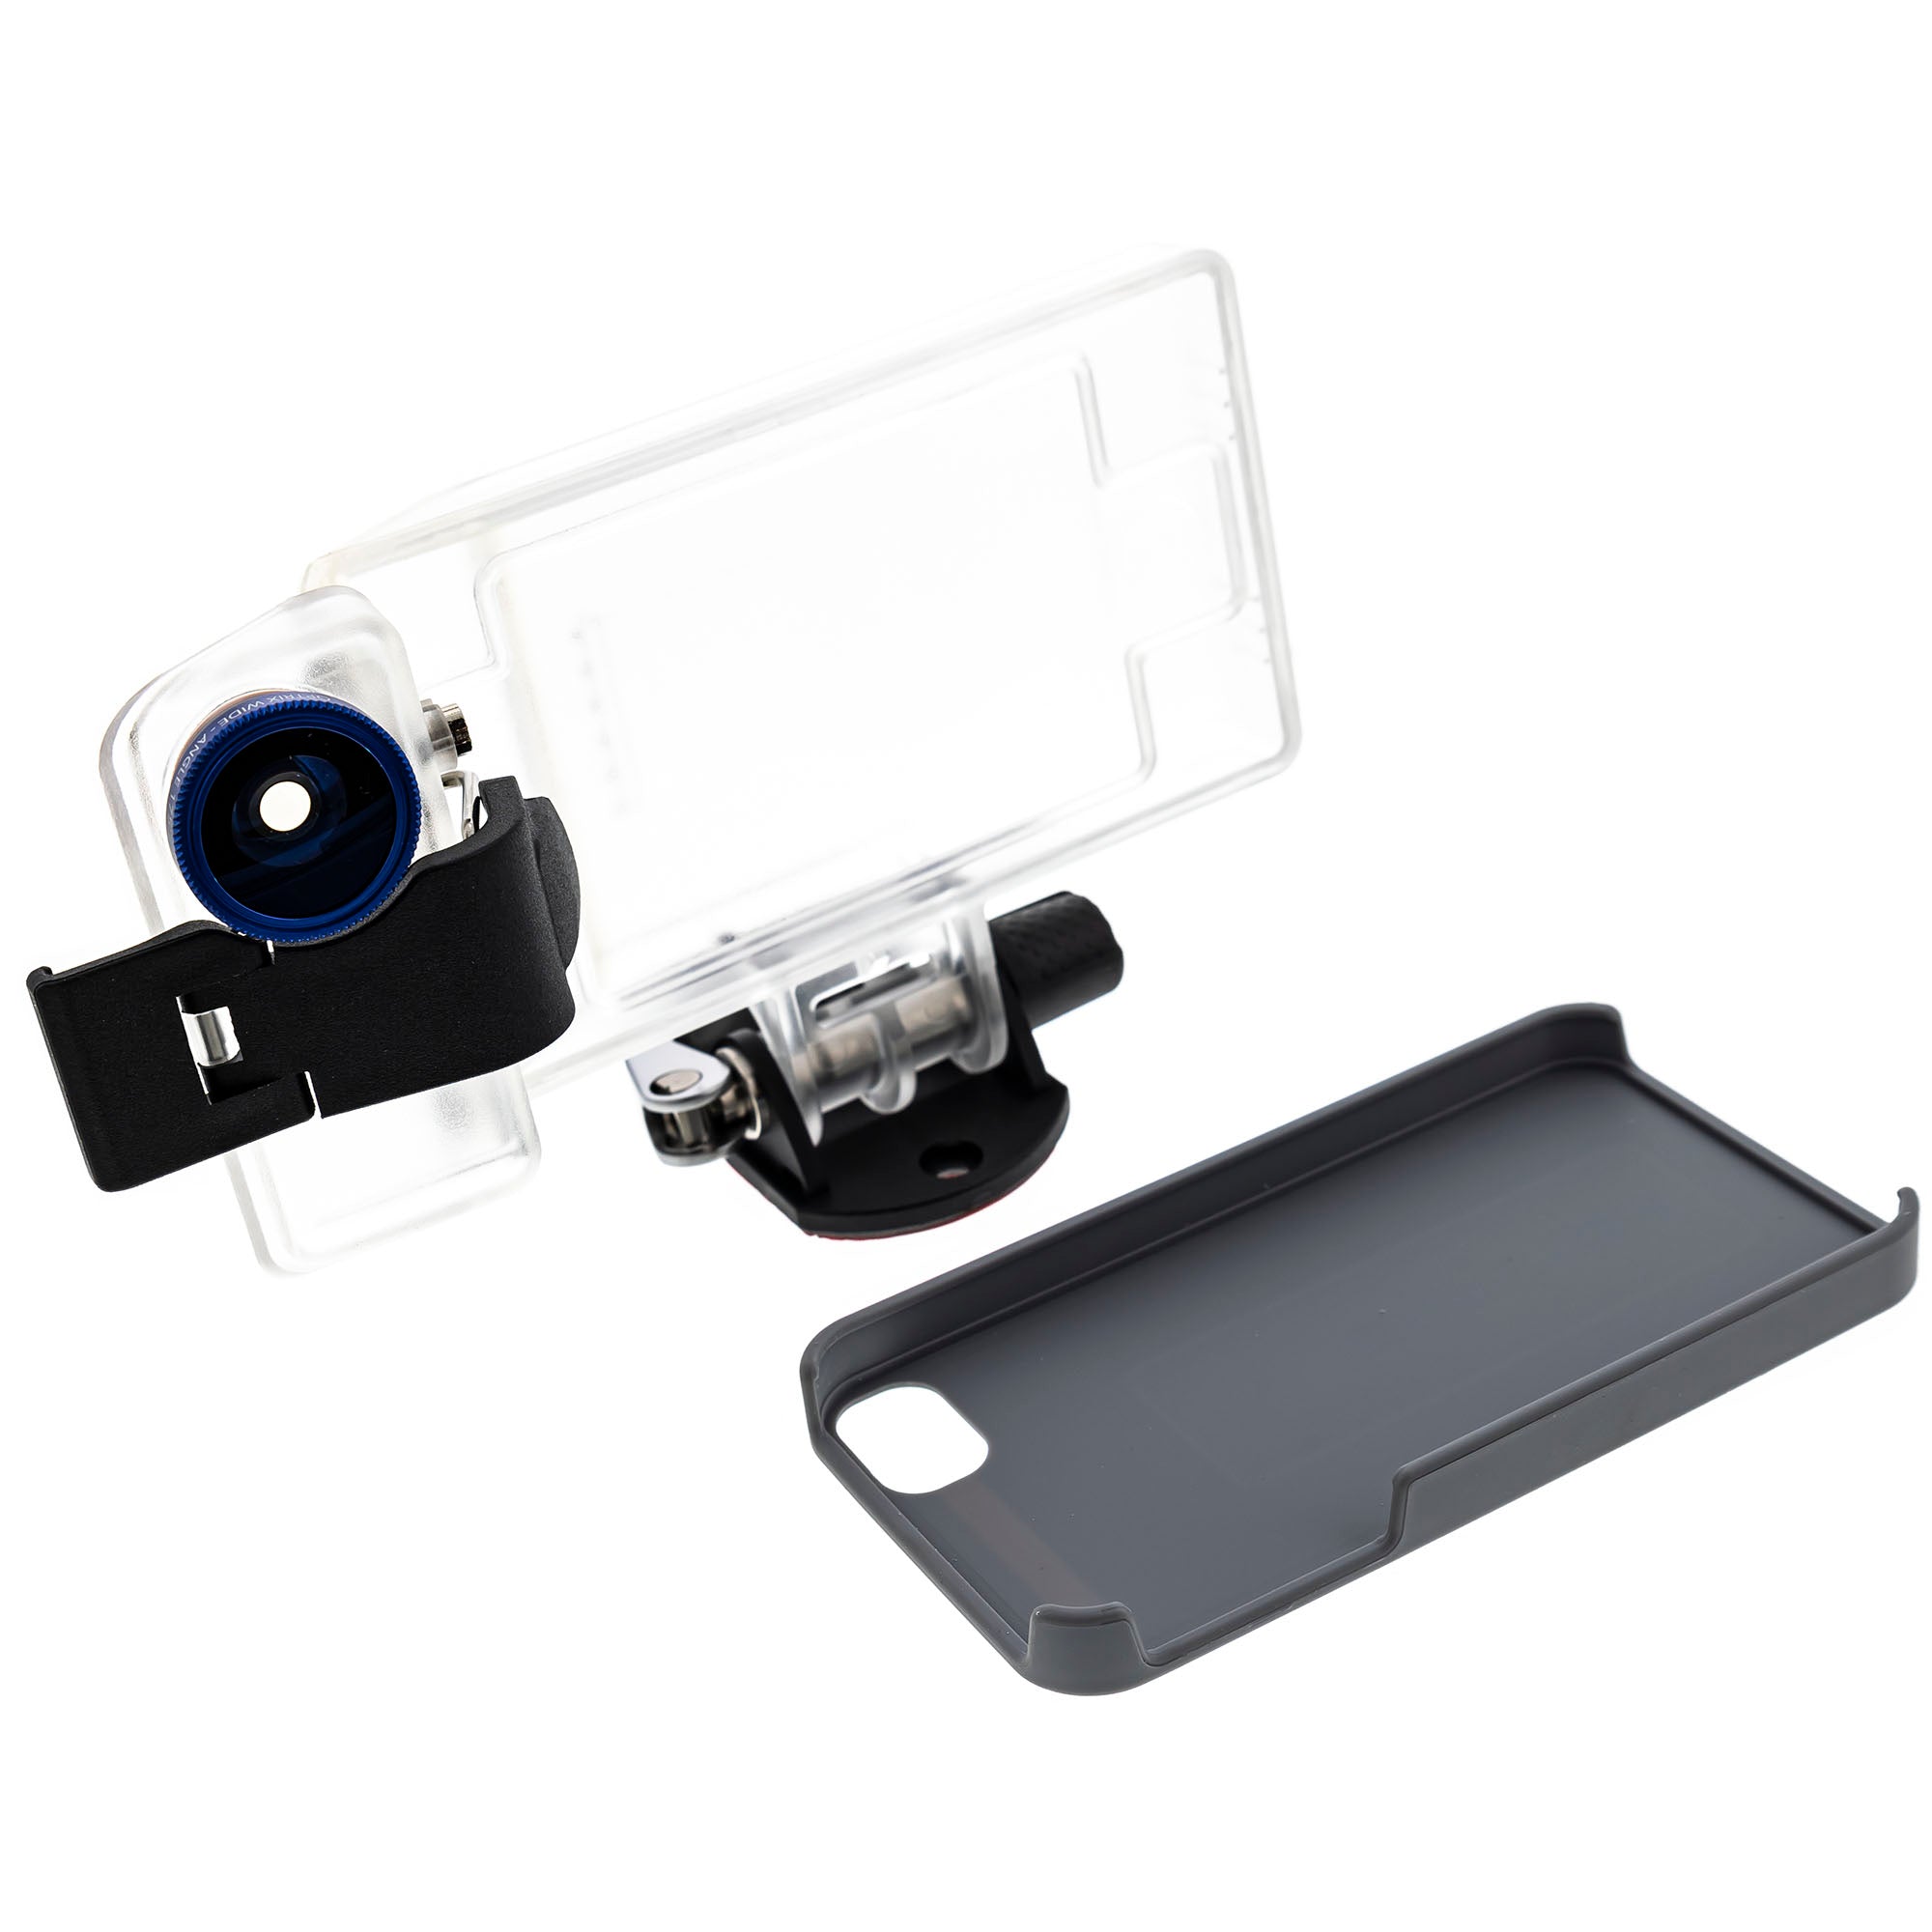 Polaris 2879421 Optrix XD Protective Wide-Angle Sport Filming Case For iPhone iPod Touch